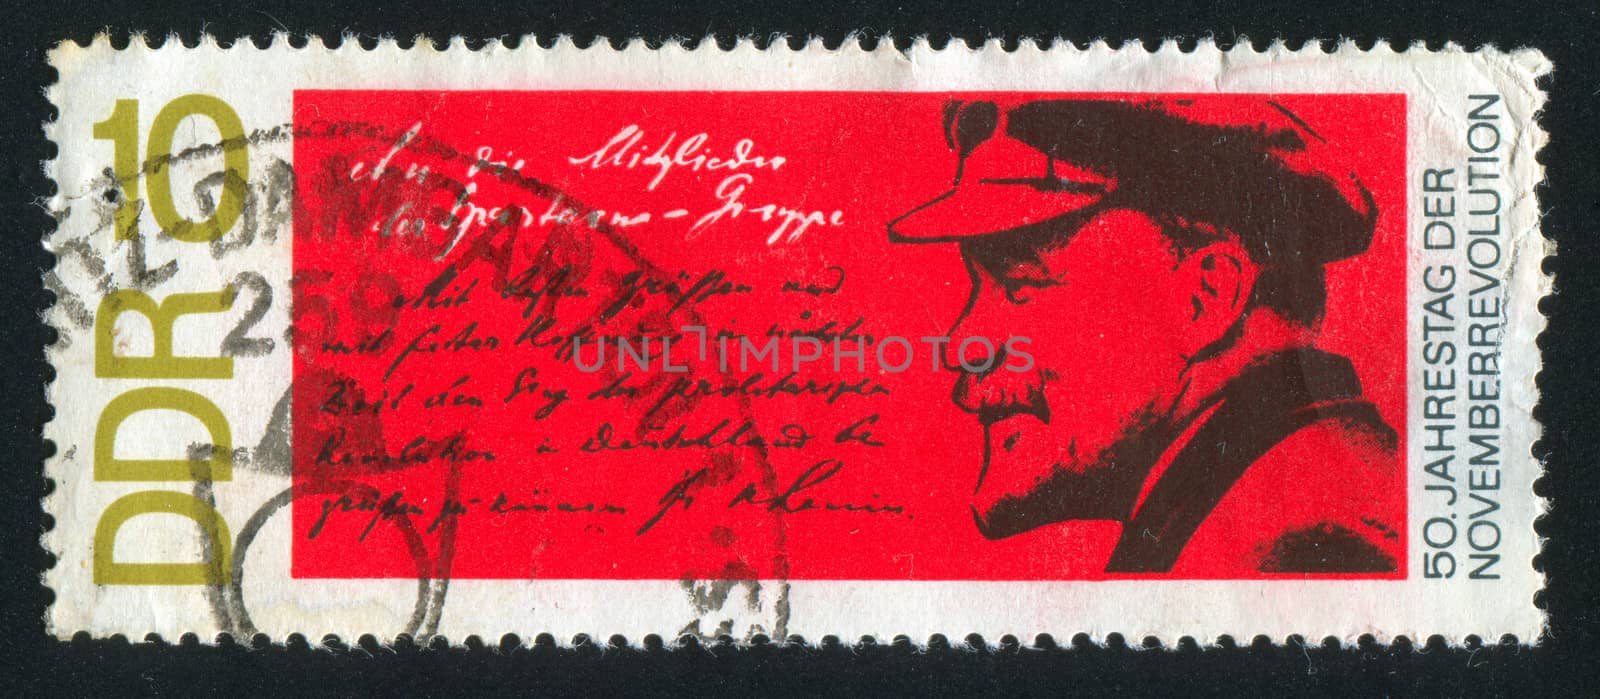 Lenin and Letter to Spartacists by rook